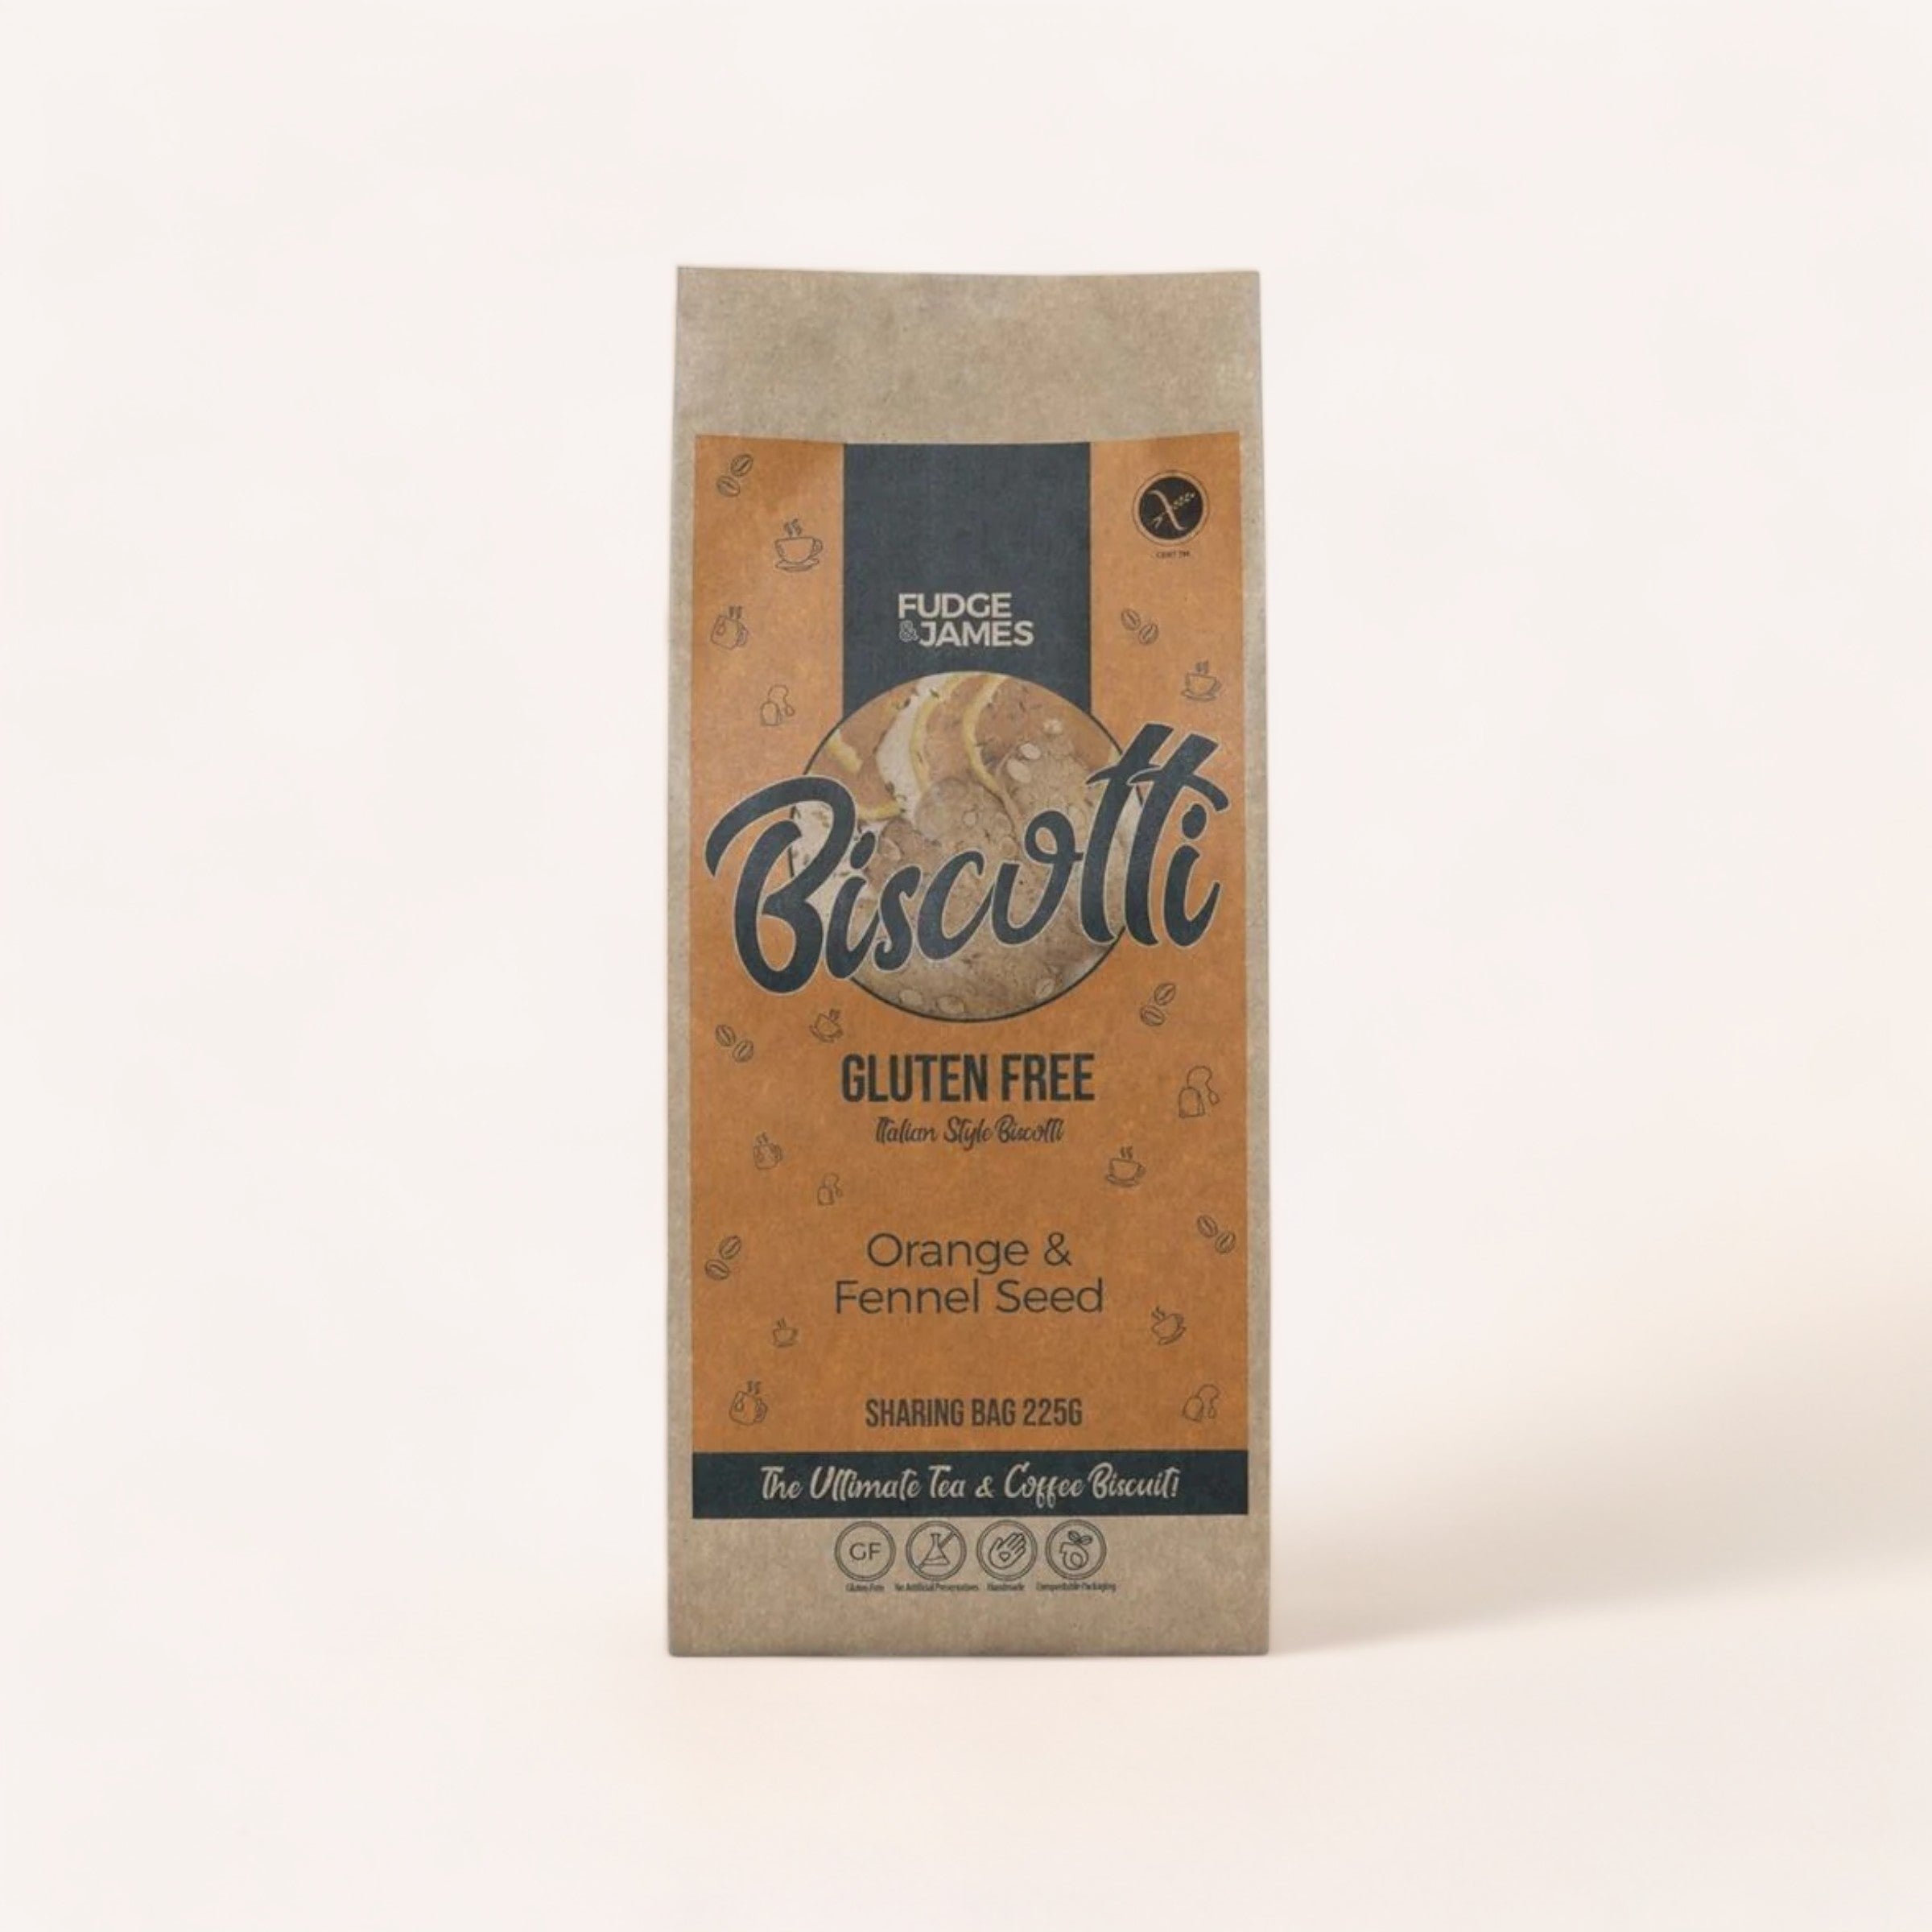 A pack of gluten-free biscotti with orange and fennel seed flavor, marketed as the ultimate companion for giftbox co. Coffee, Anyone?